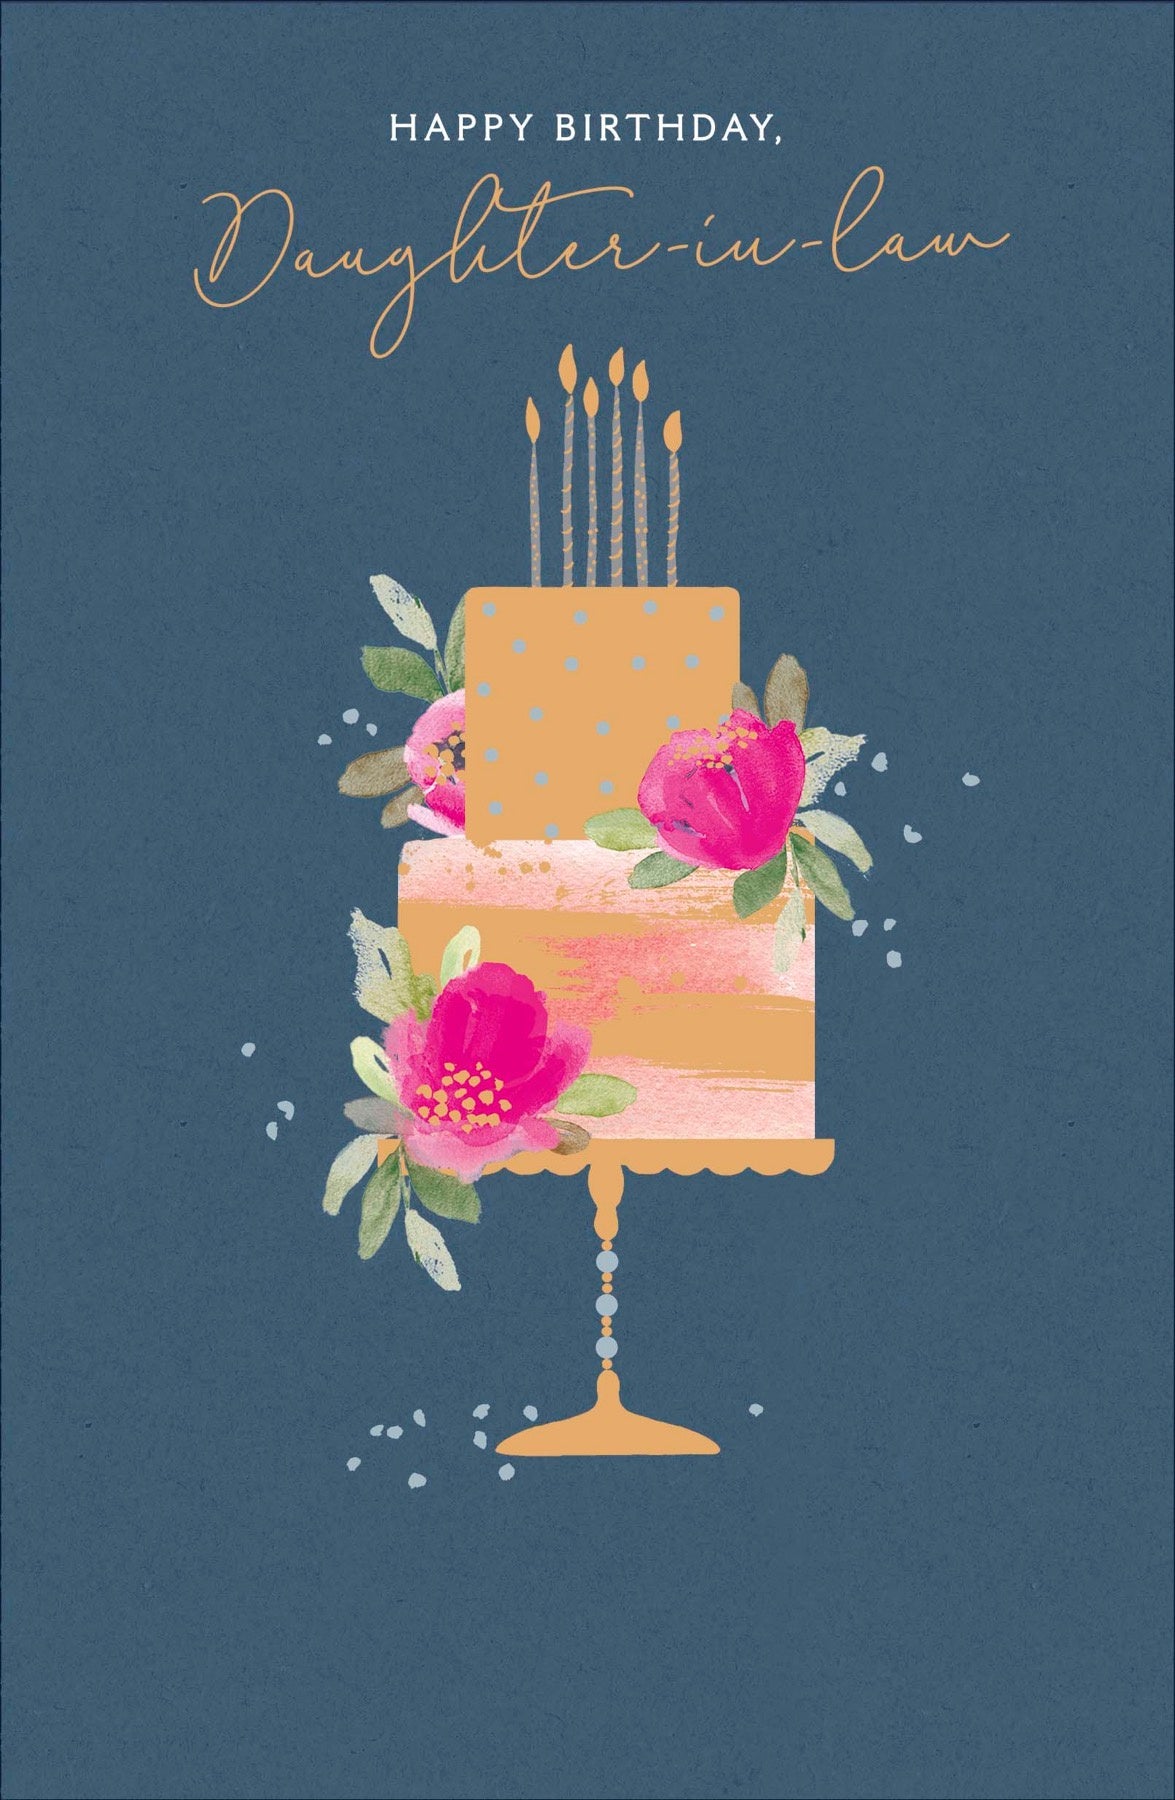 Daughter In Law Floral Cake Card